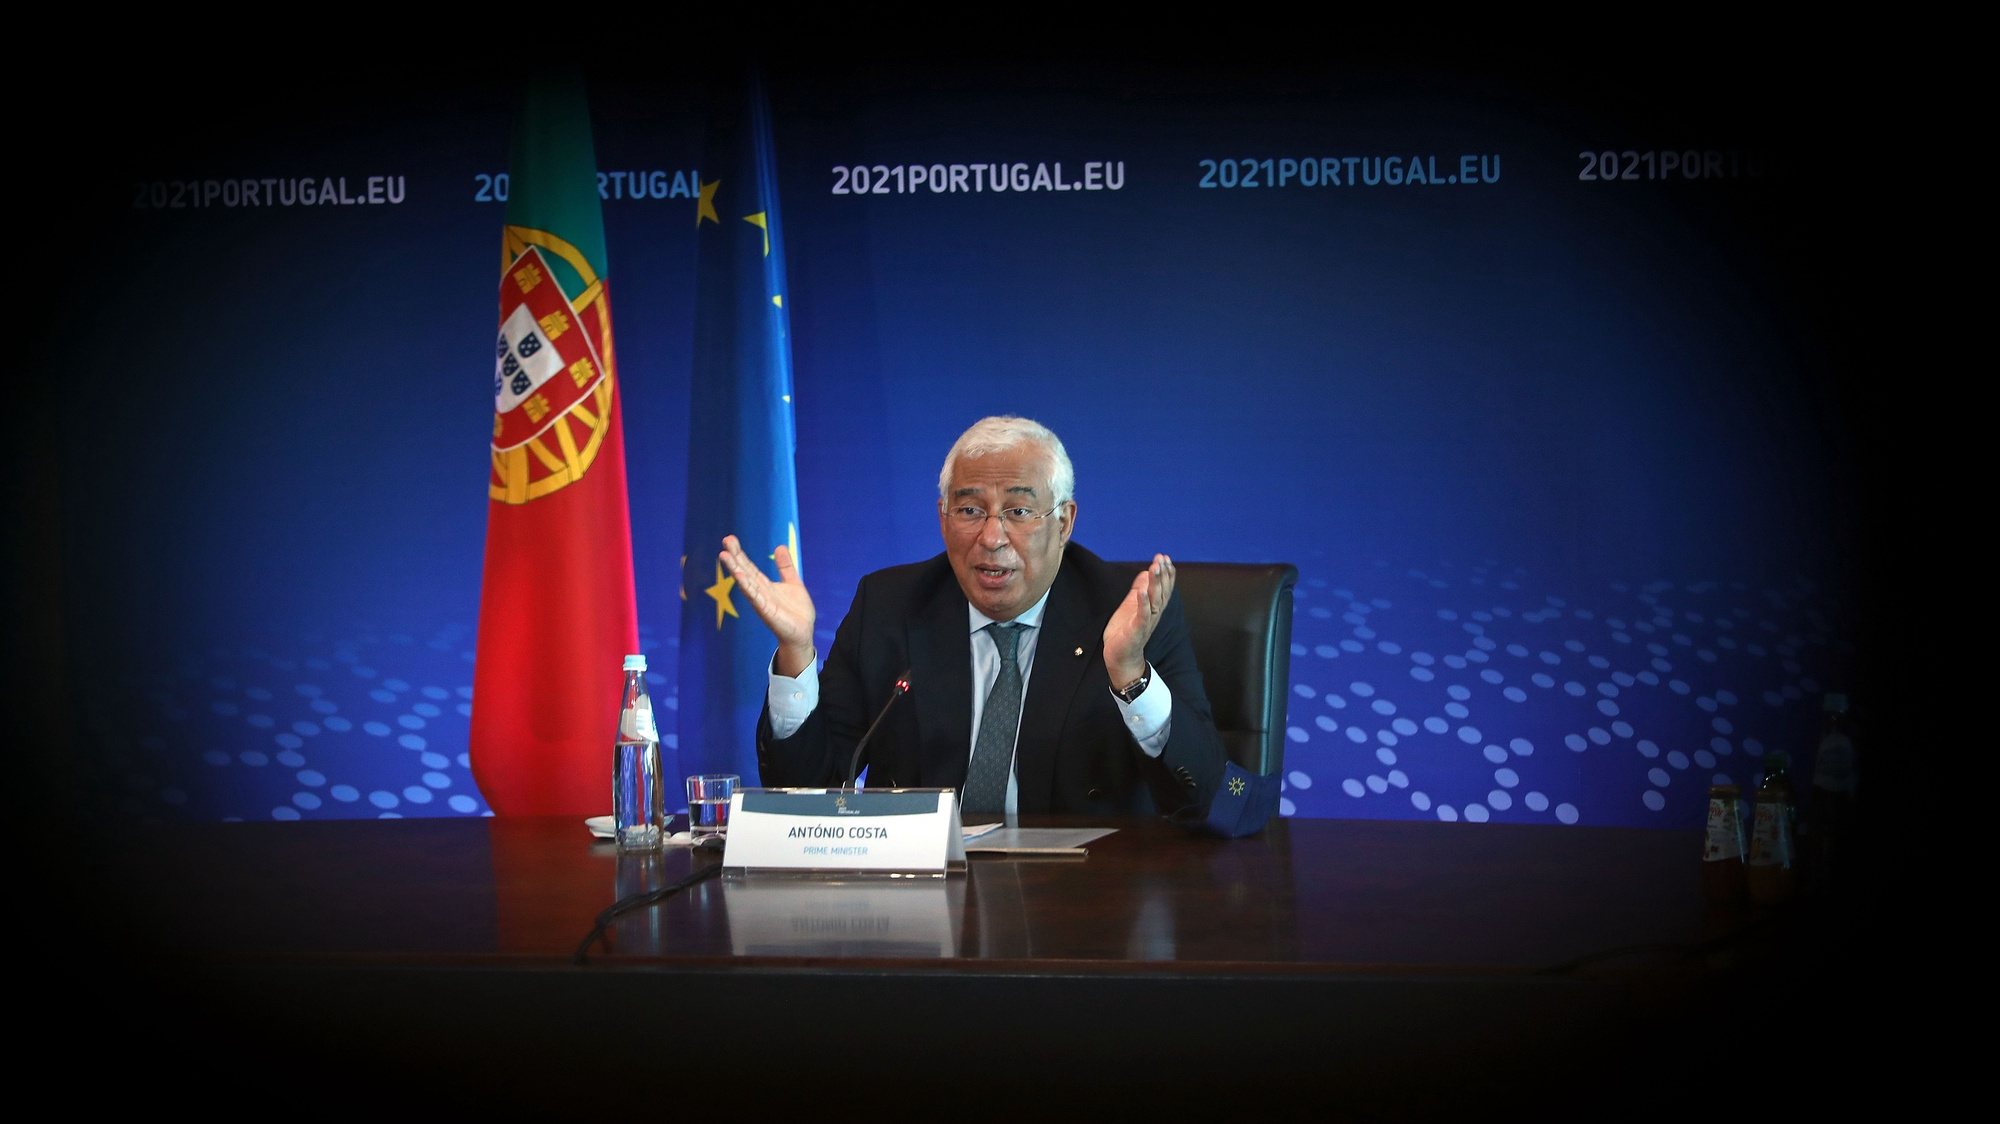 Portuguese Prime Minister António Costa during a virtual visit of journalists included in the official program of the Portuguese Presidency of the Council of the European Union in Lisbon, Portugal, 07 January 2021. During the first half of this year, Portugal will have its fourth presidency after 1992, 2000 and 2007. ANTÓNIO PEDRO SANTOS/LUSA